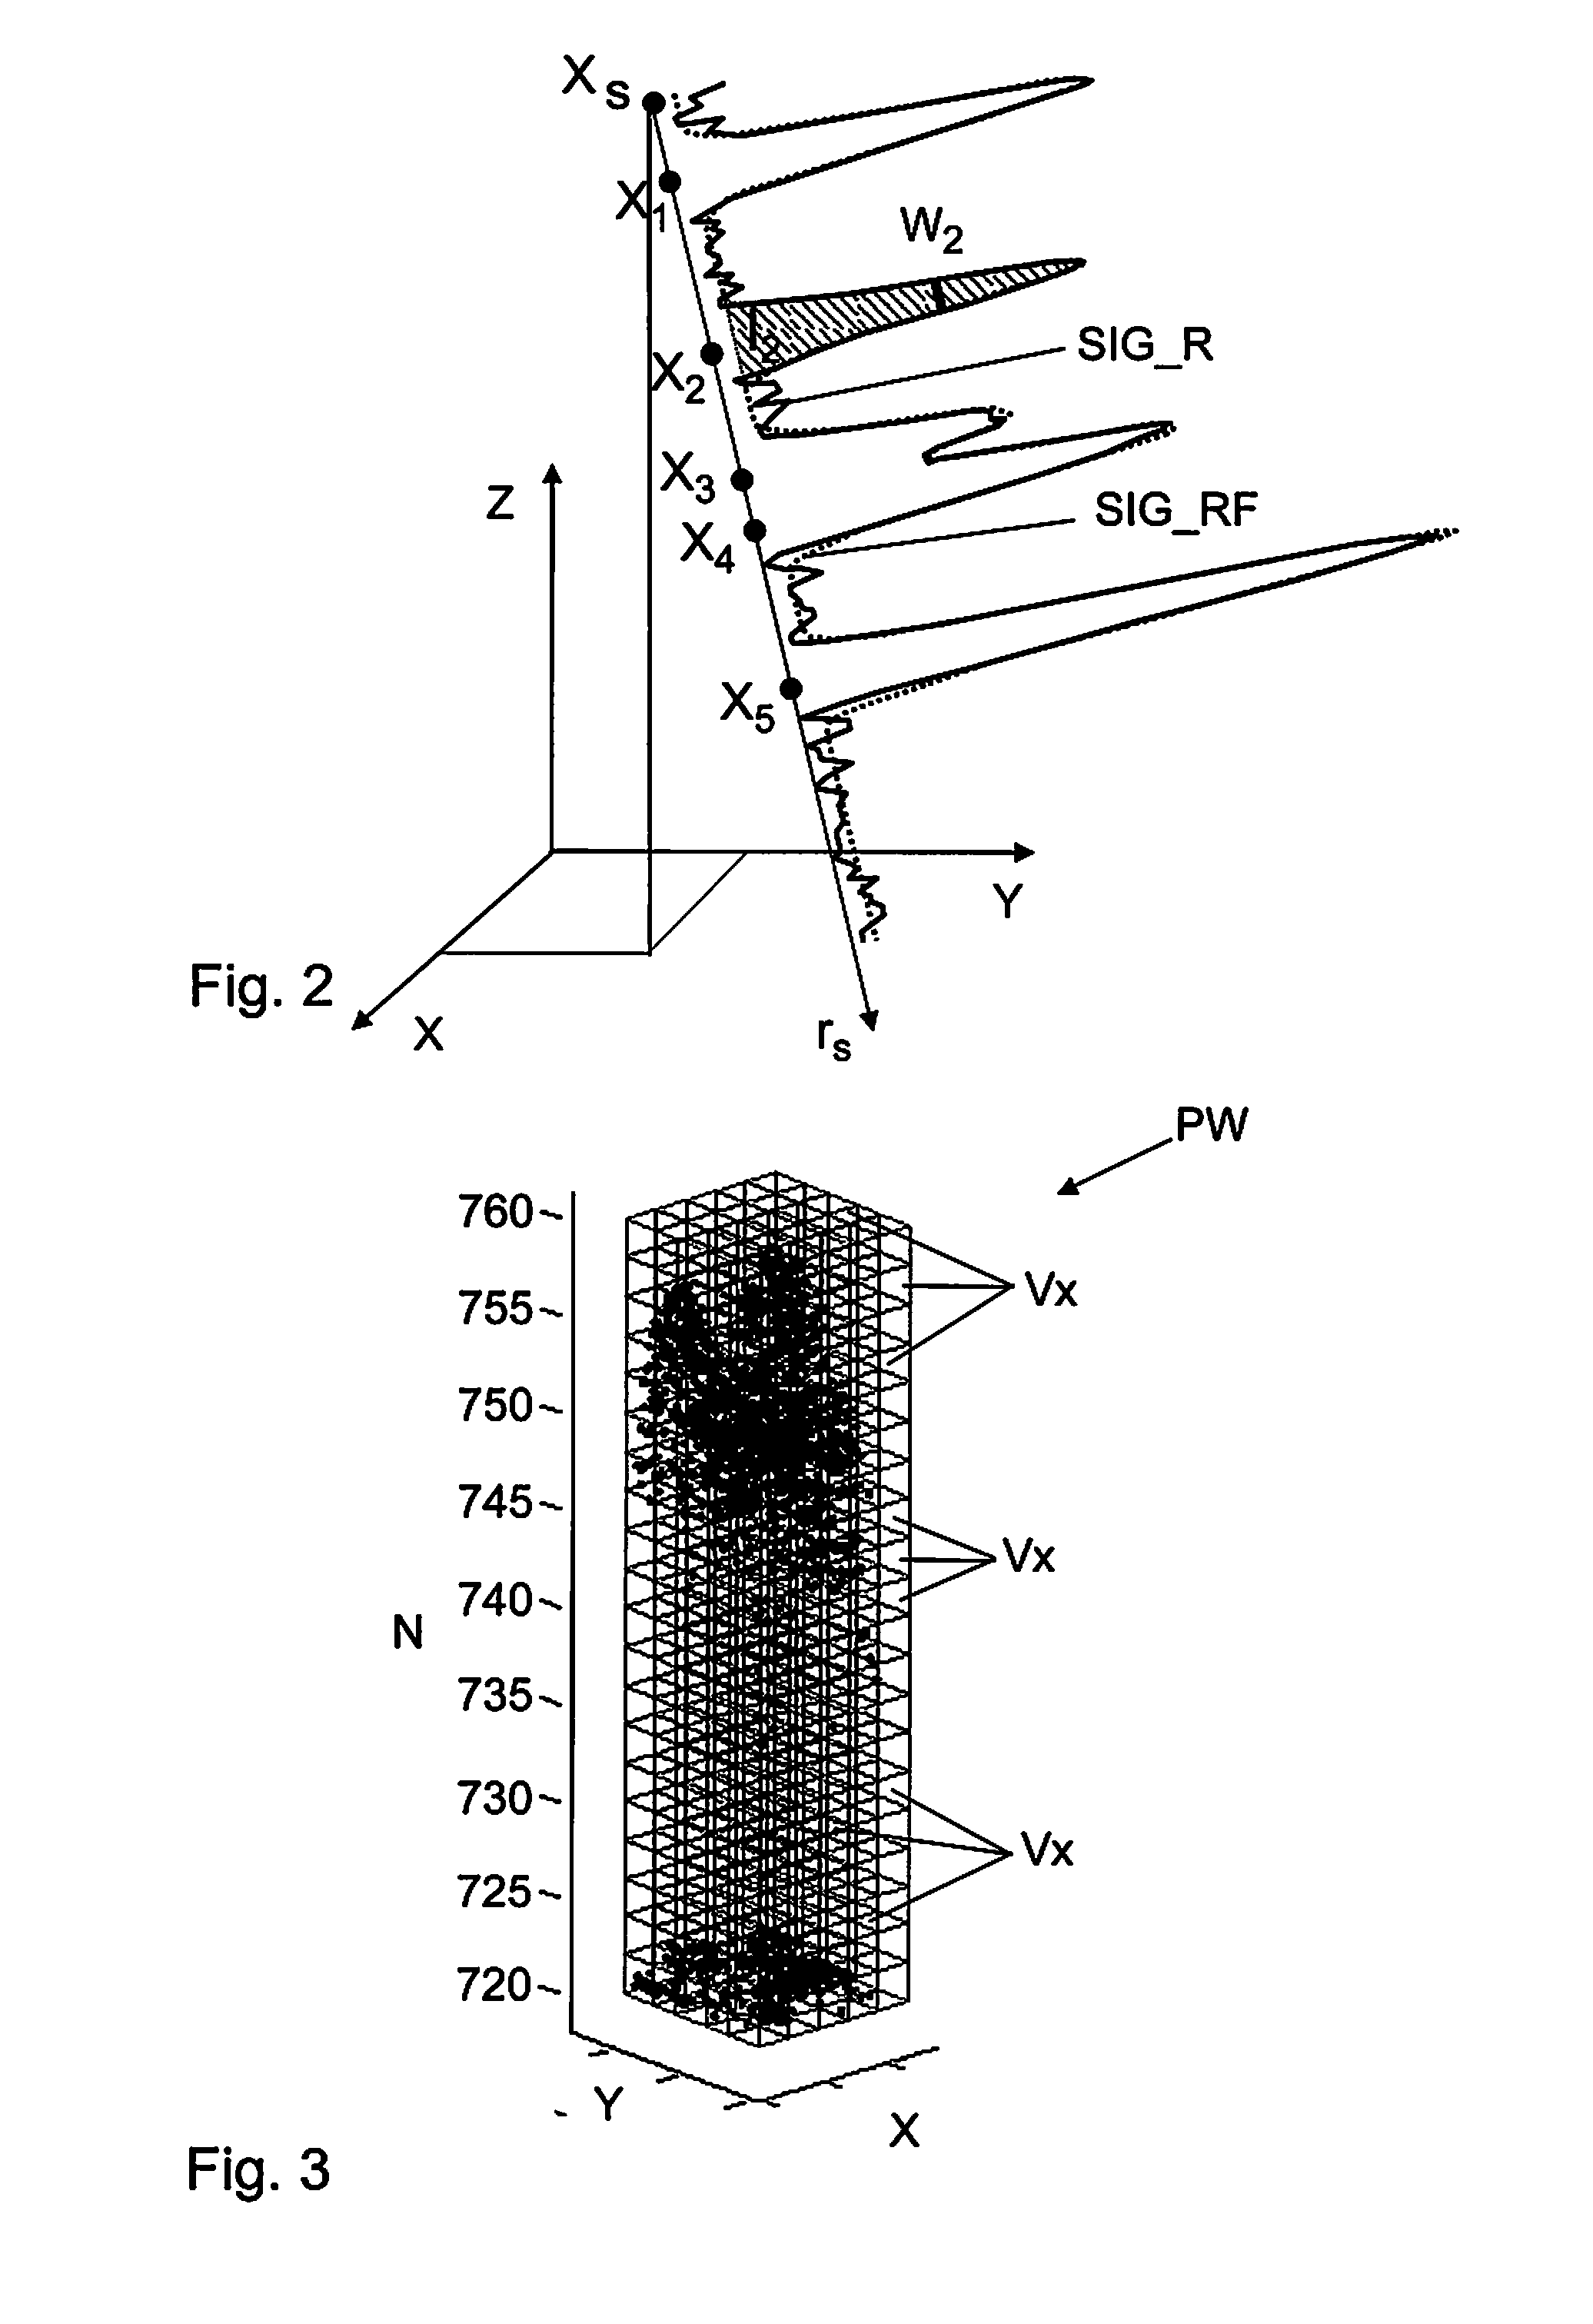 Method and device for computer-aided segmentation of an environment into individual objects